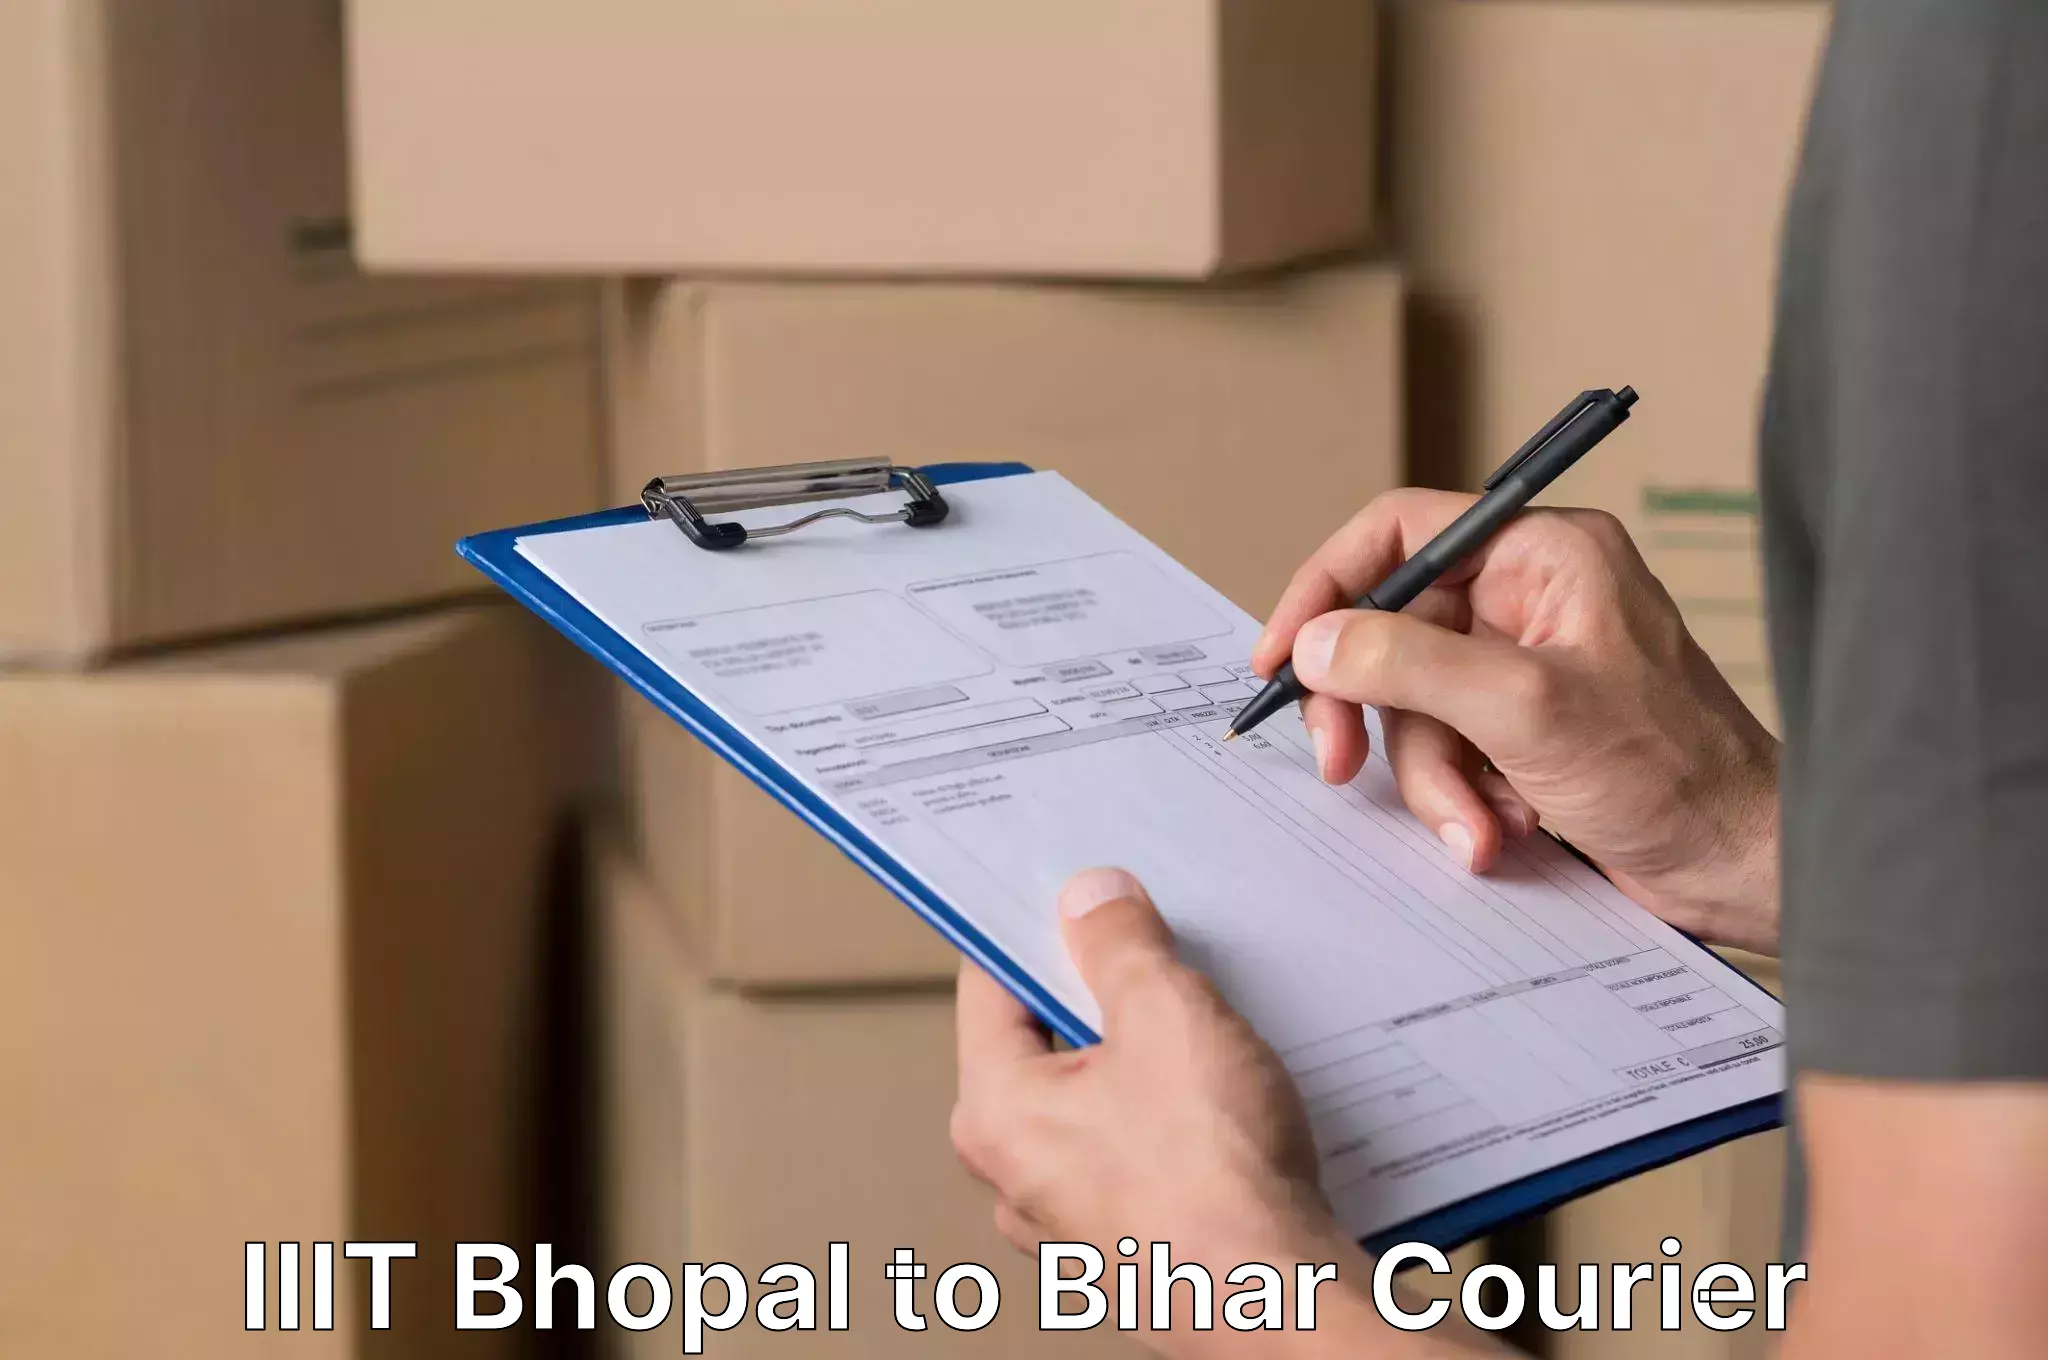 Furniture transport services IIIT Bhopal to Bhojpur